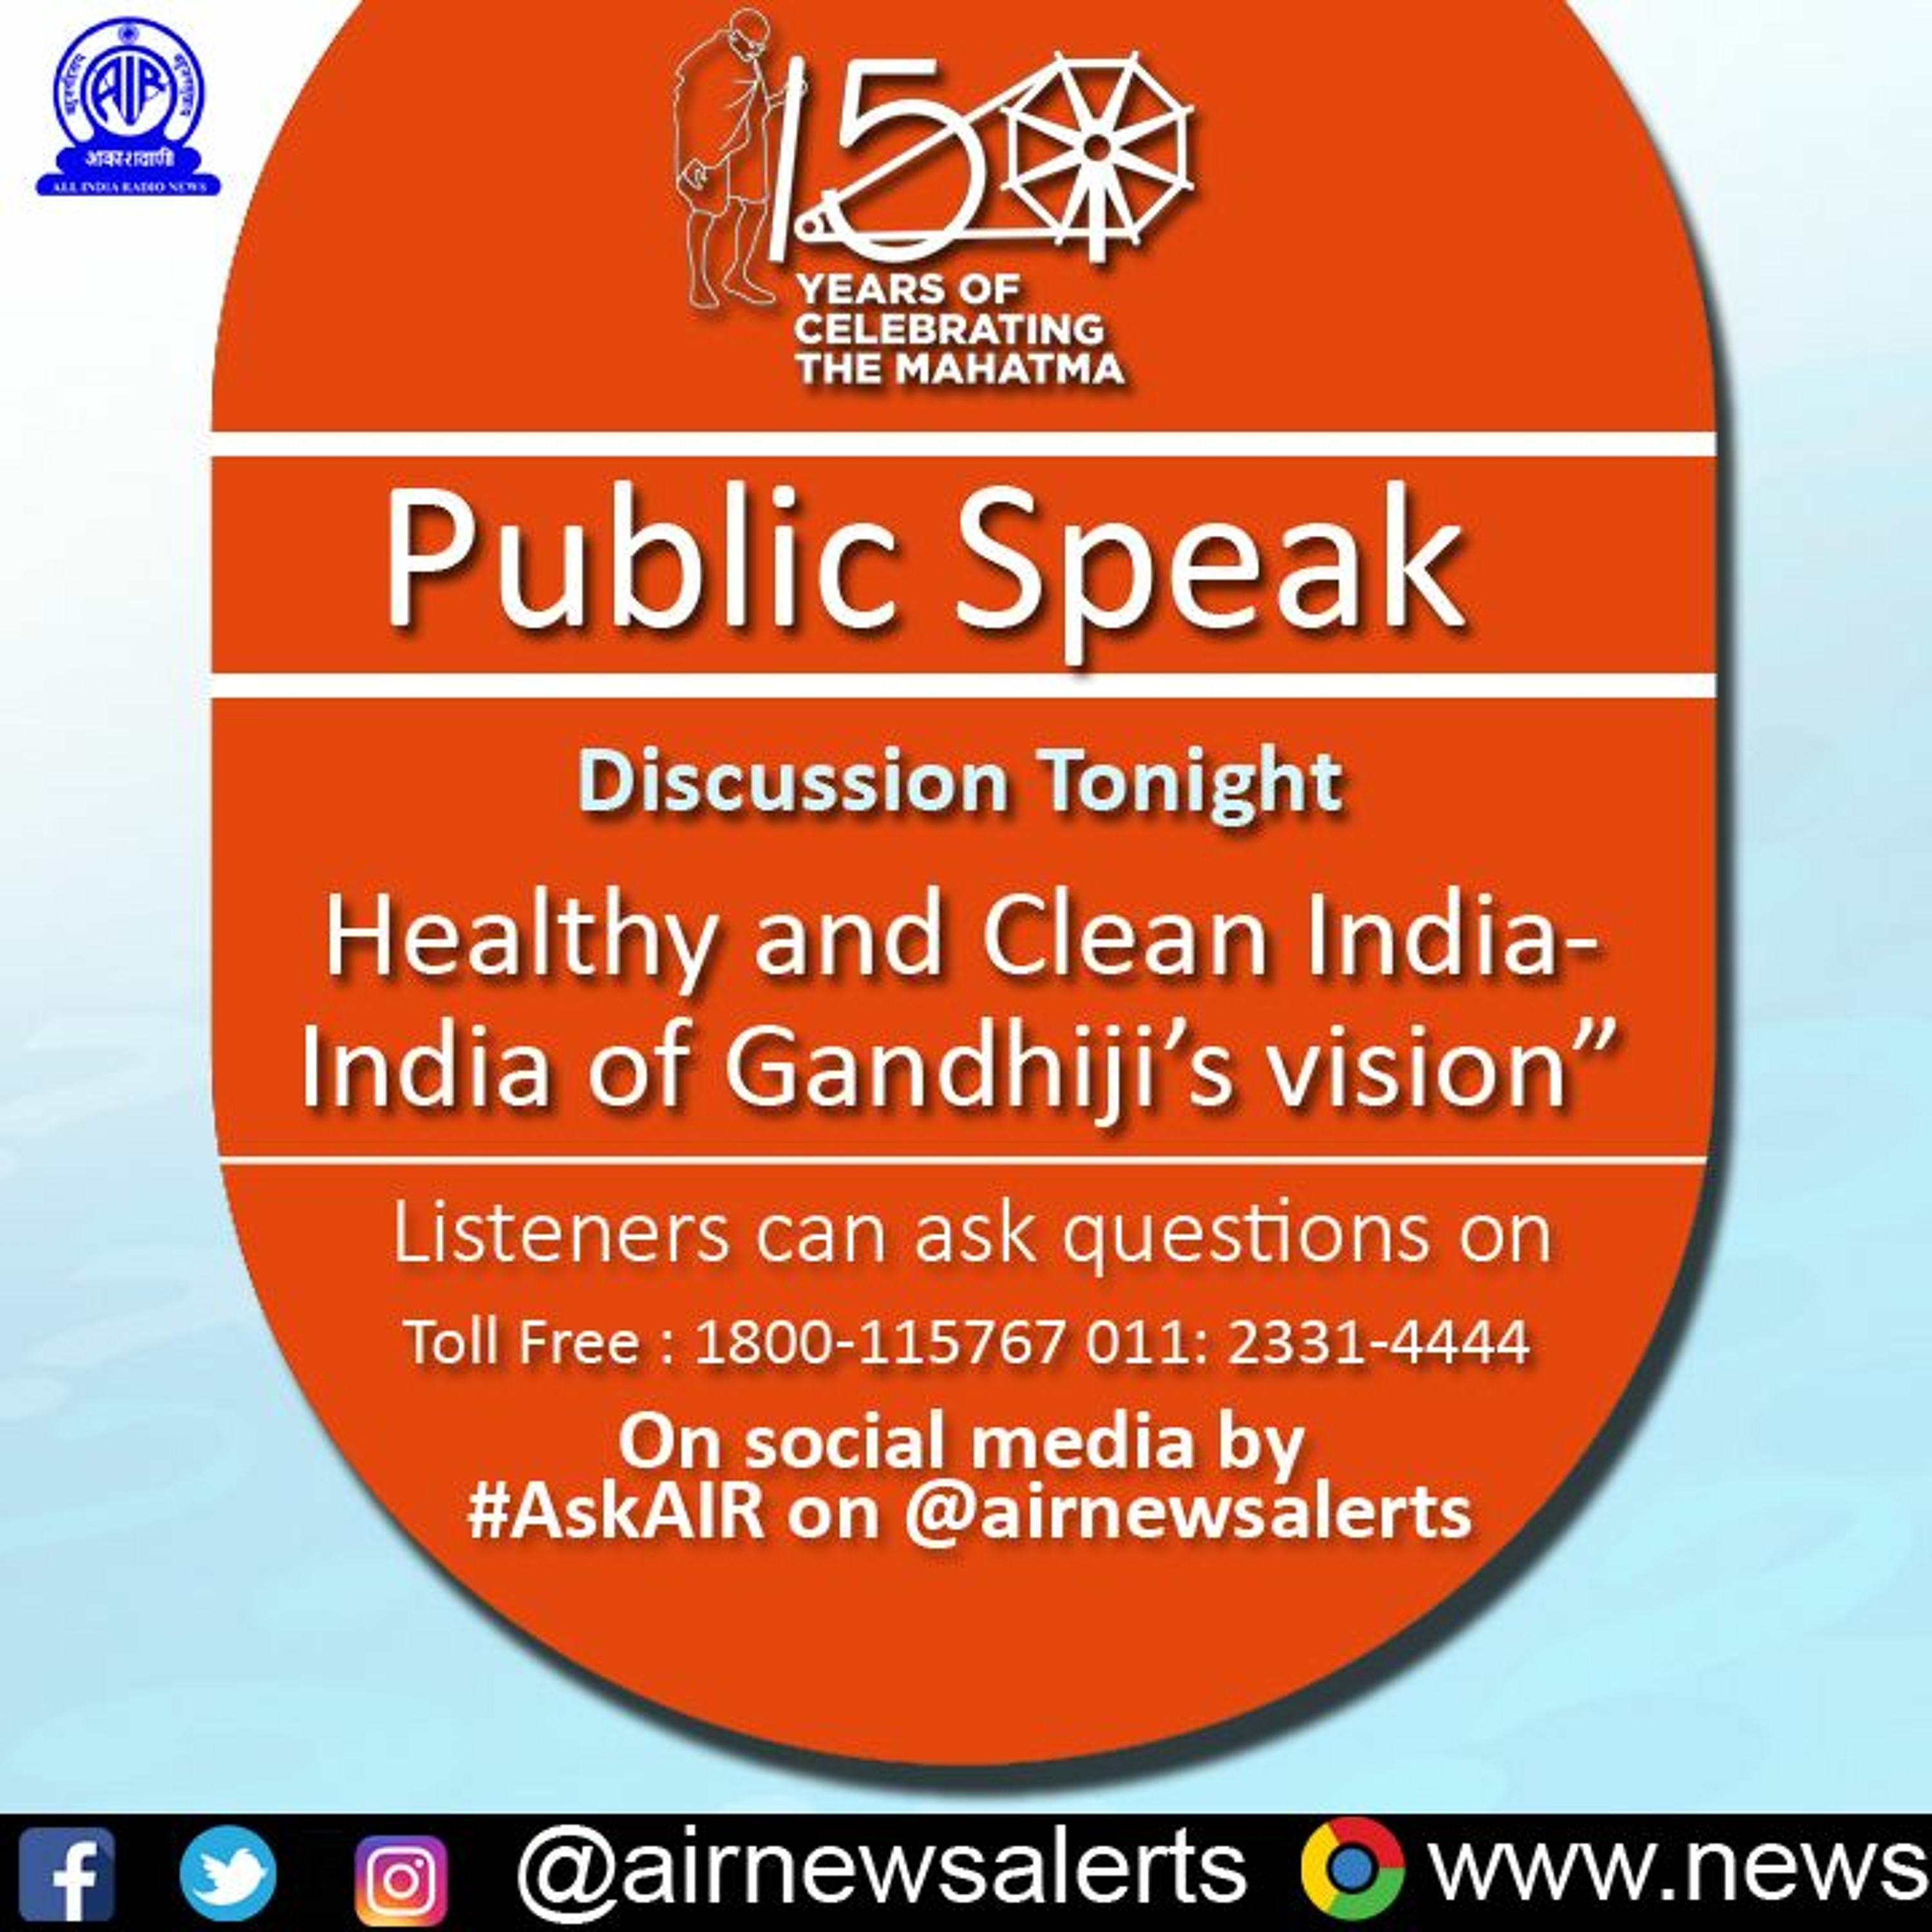 PUBLIC SPEAK: Discussion on “Healthy and Clean India- India of Gandhiji’s vision”